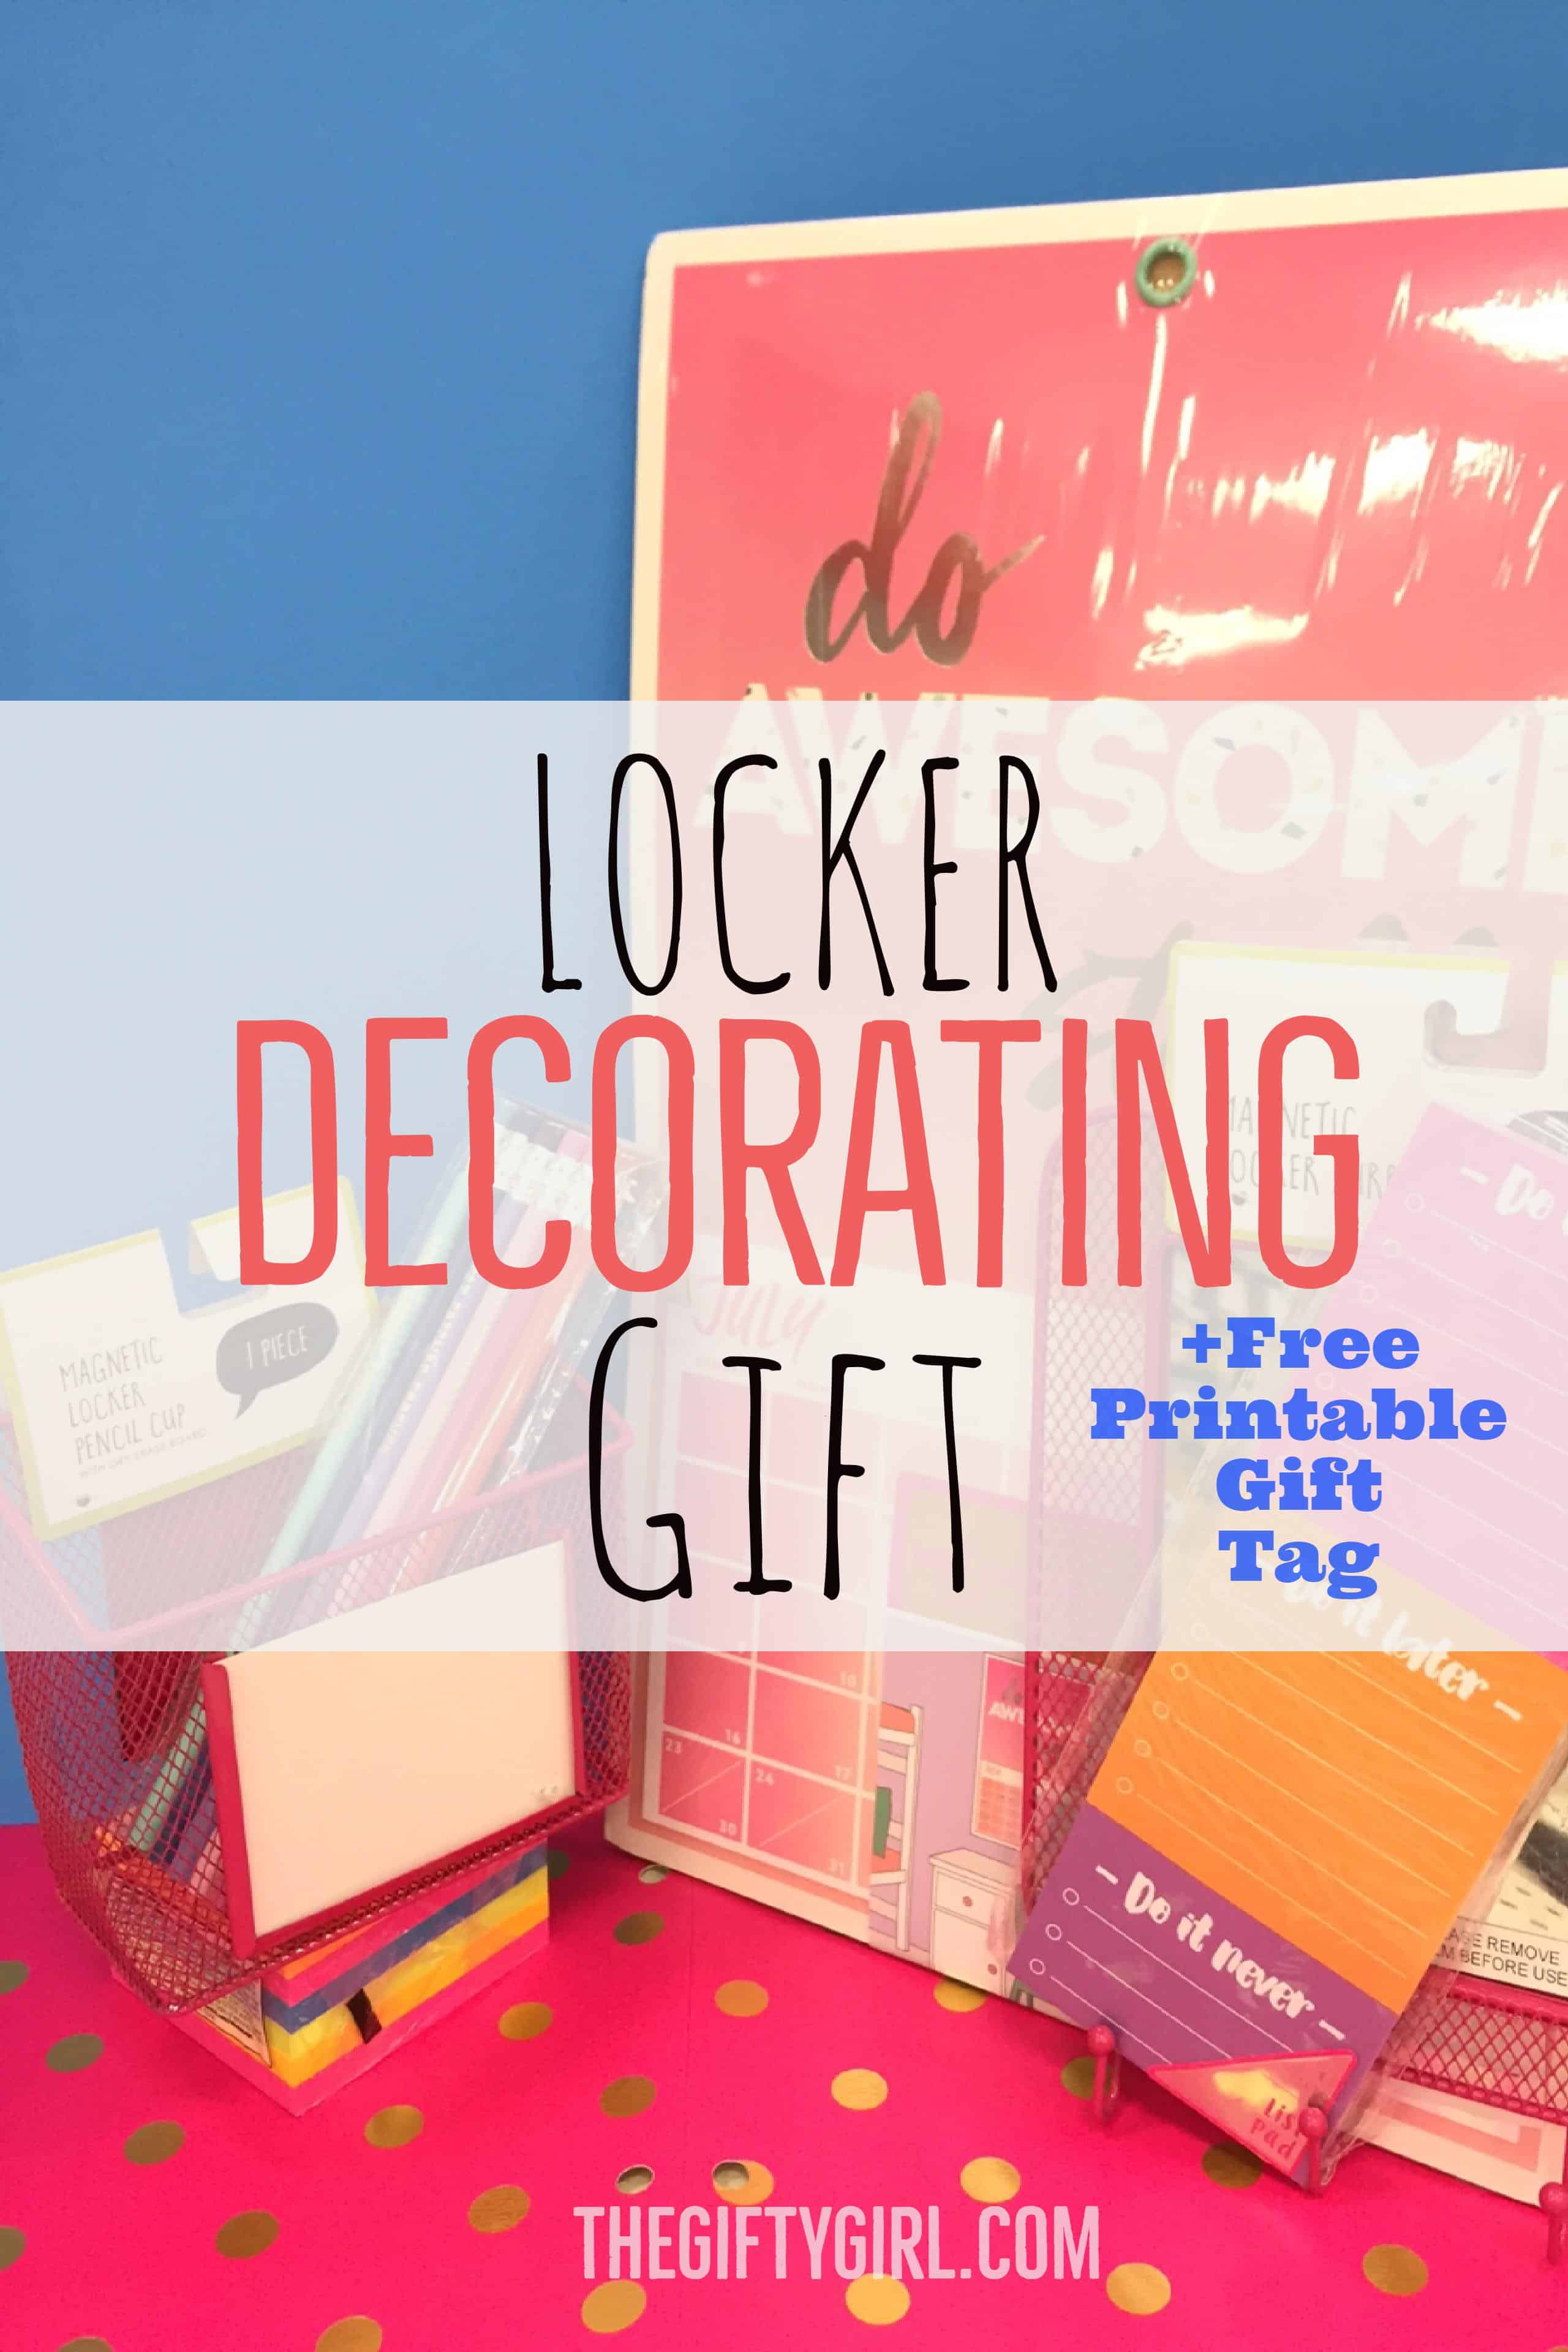 Locker Decorating Gift for tweens and teens plus free printable gift tag